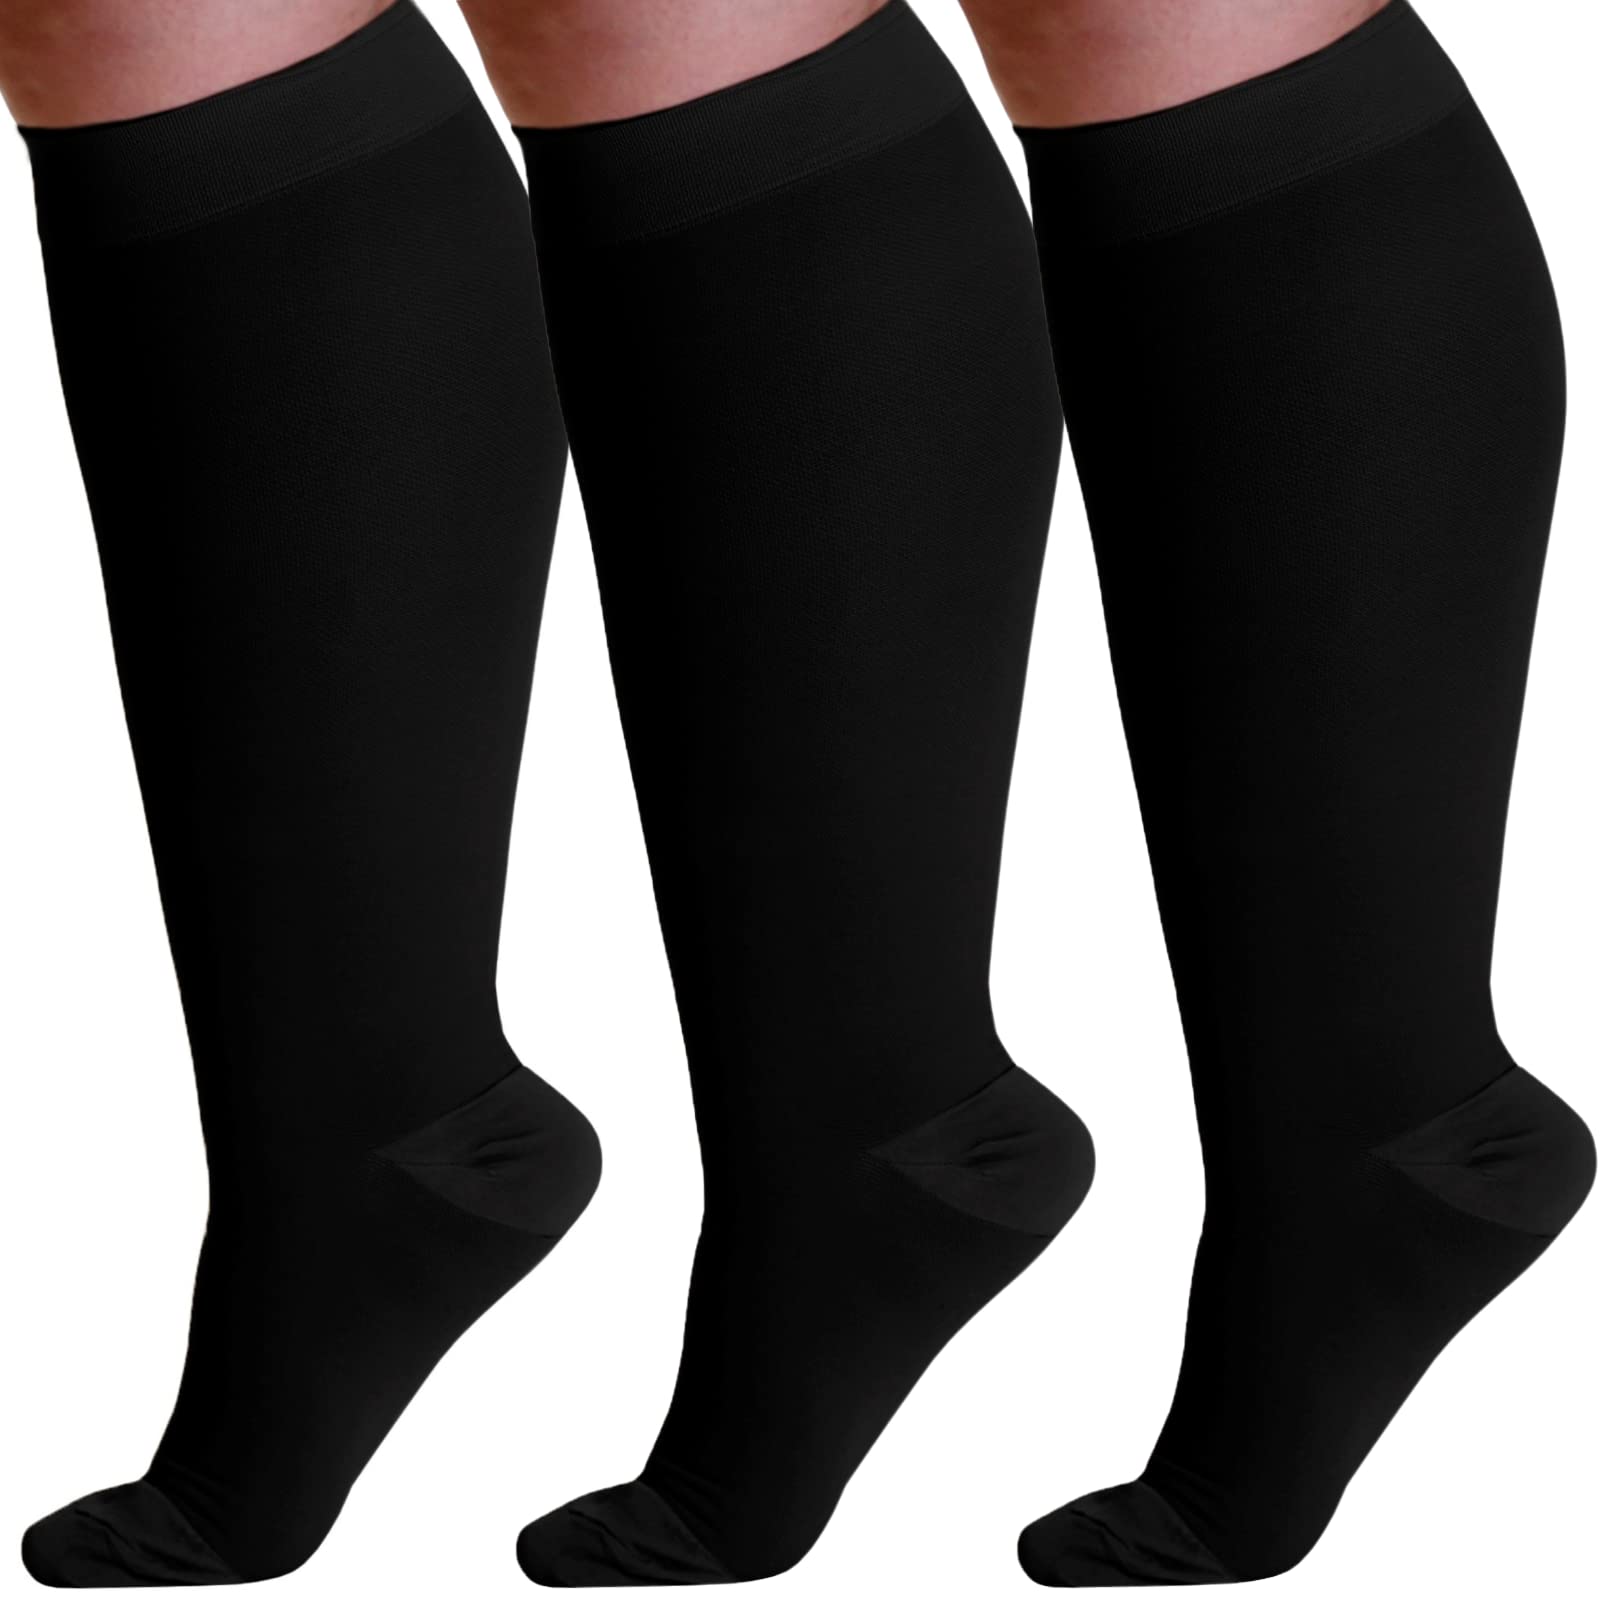 3 pack) Wide Calf Compression Support Stockings for Men and Women  Circulation 20-30mmHg - Plus Size Compression Knee Hi Prevents Swelling  Pain Varicose Veins Edema - Black 4X-Large 4X-Large Black